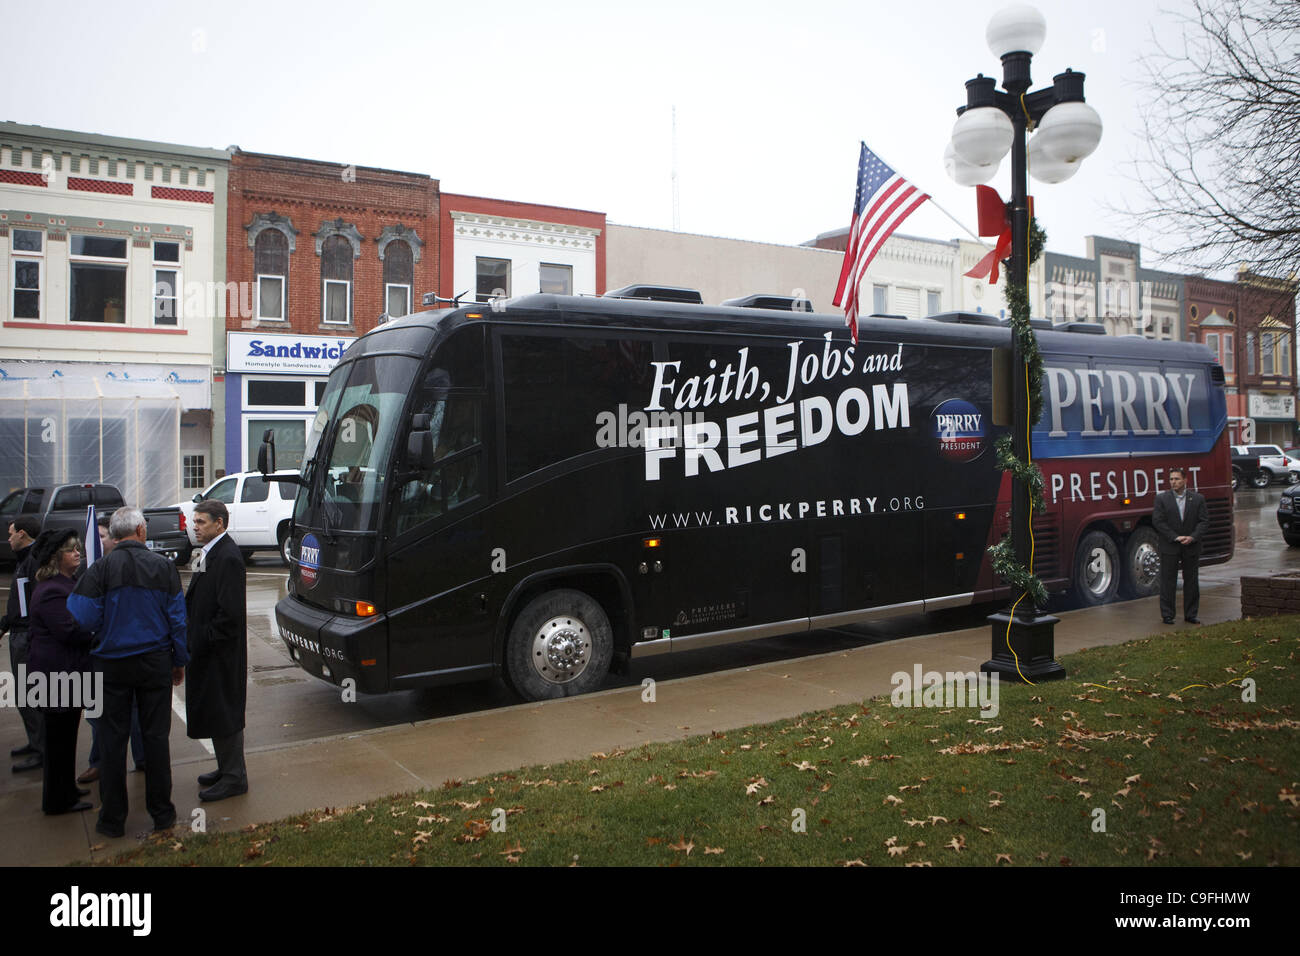 Dec. 14, 2011 - Harlan, Iowa, U.S. - Republican presidential candidate Texas Gov. Rick Perry talks with Dawn Cundiff of the Shelby County Chamber of Commerce as he campaigns during a Main Street Tour on the first day of his two week bus tour leading up to the Iowa Caucuses on Wednesday, December 14, Stock Photo